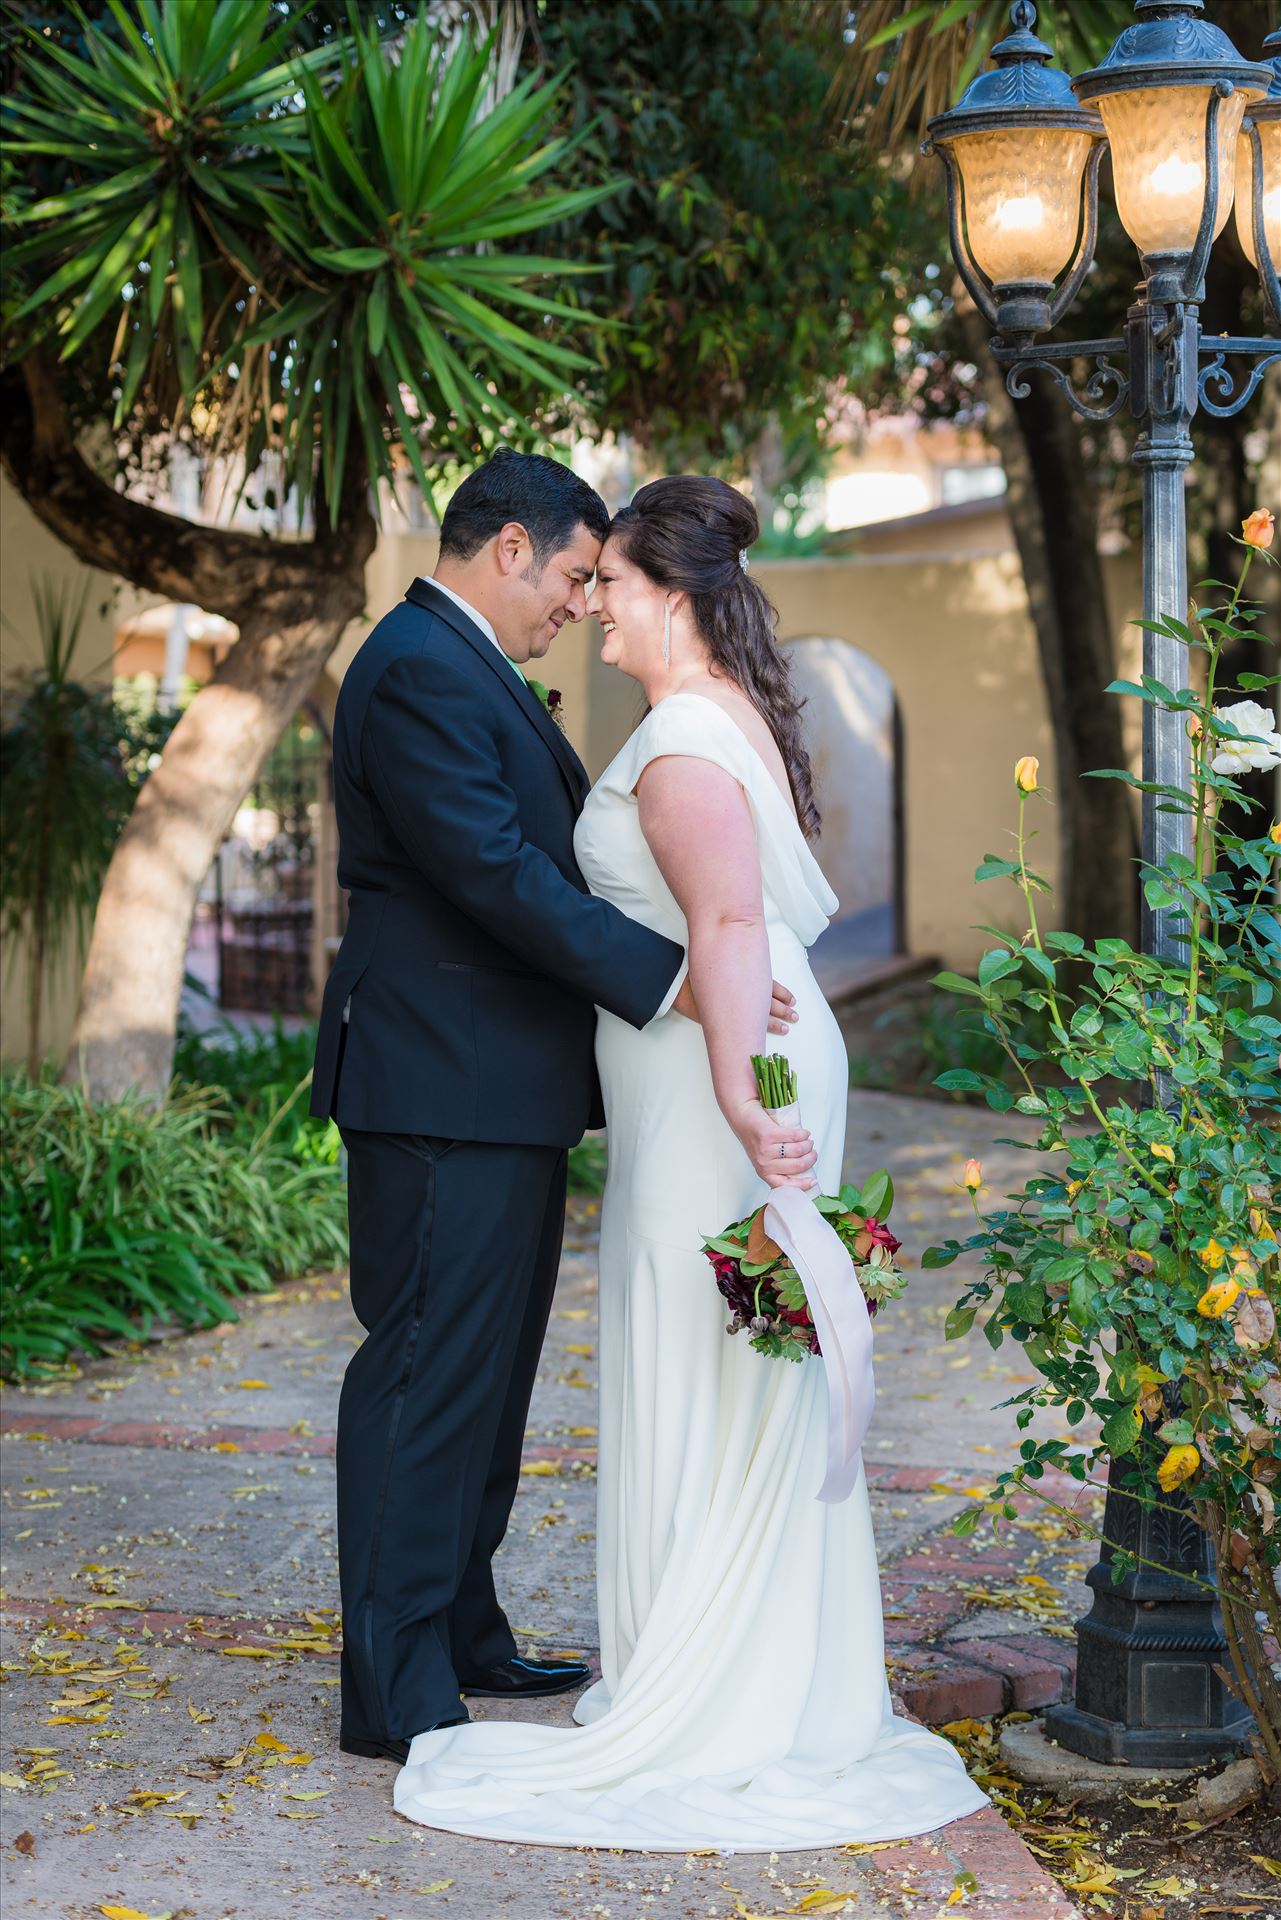 Mary and Alejandro 23 - Wedding photography at the Historic Santa Maria Inn in Santa Maria, California by Mirror's Edge Photography. Bride and Groom on the Back Lawn. by Sarah Williams